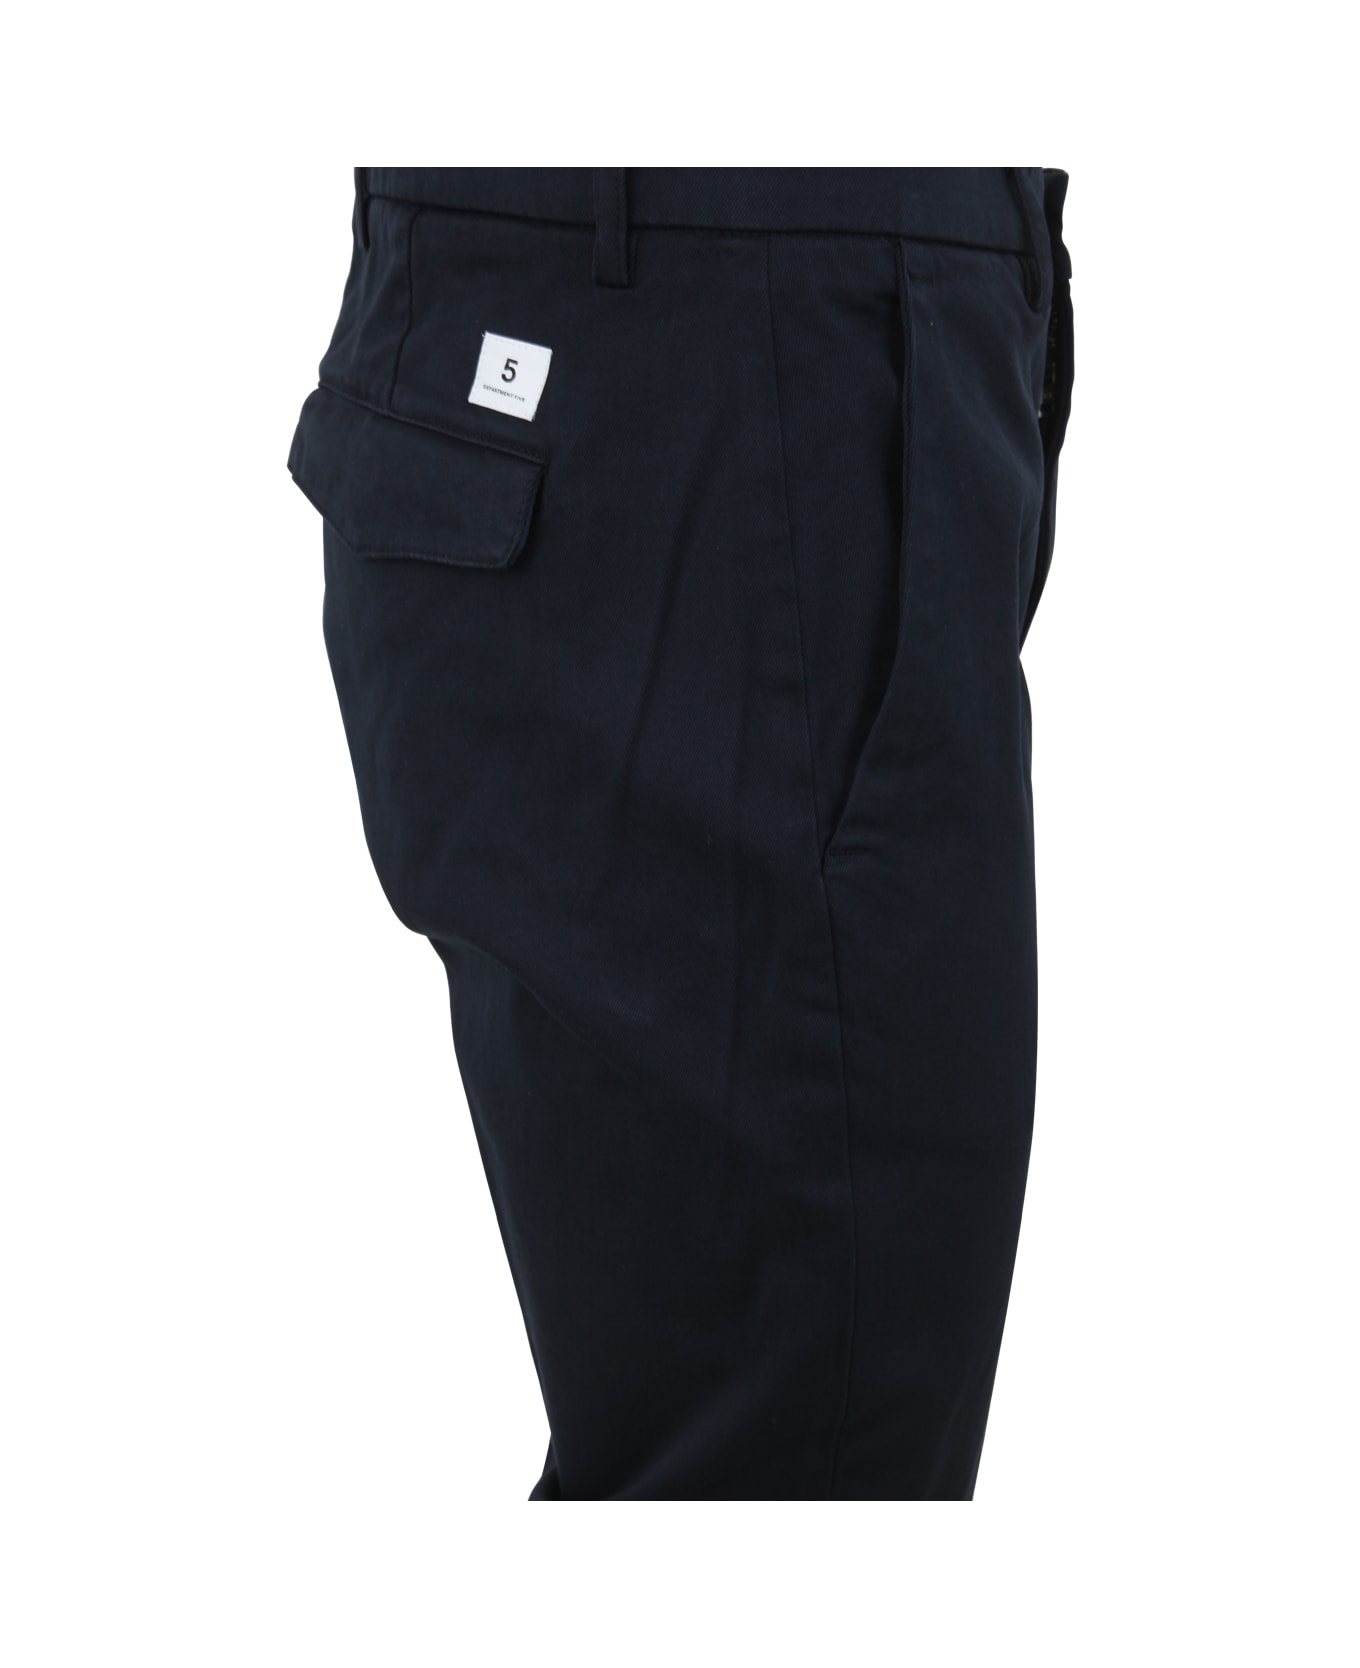 Department Five Prince Chinos Crop Trousers - Navy ボトムス